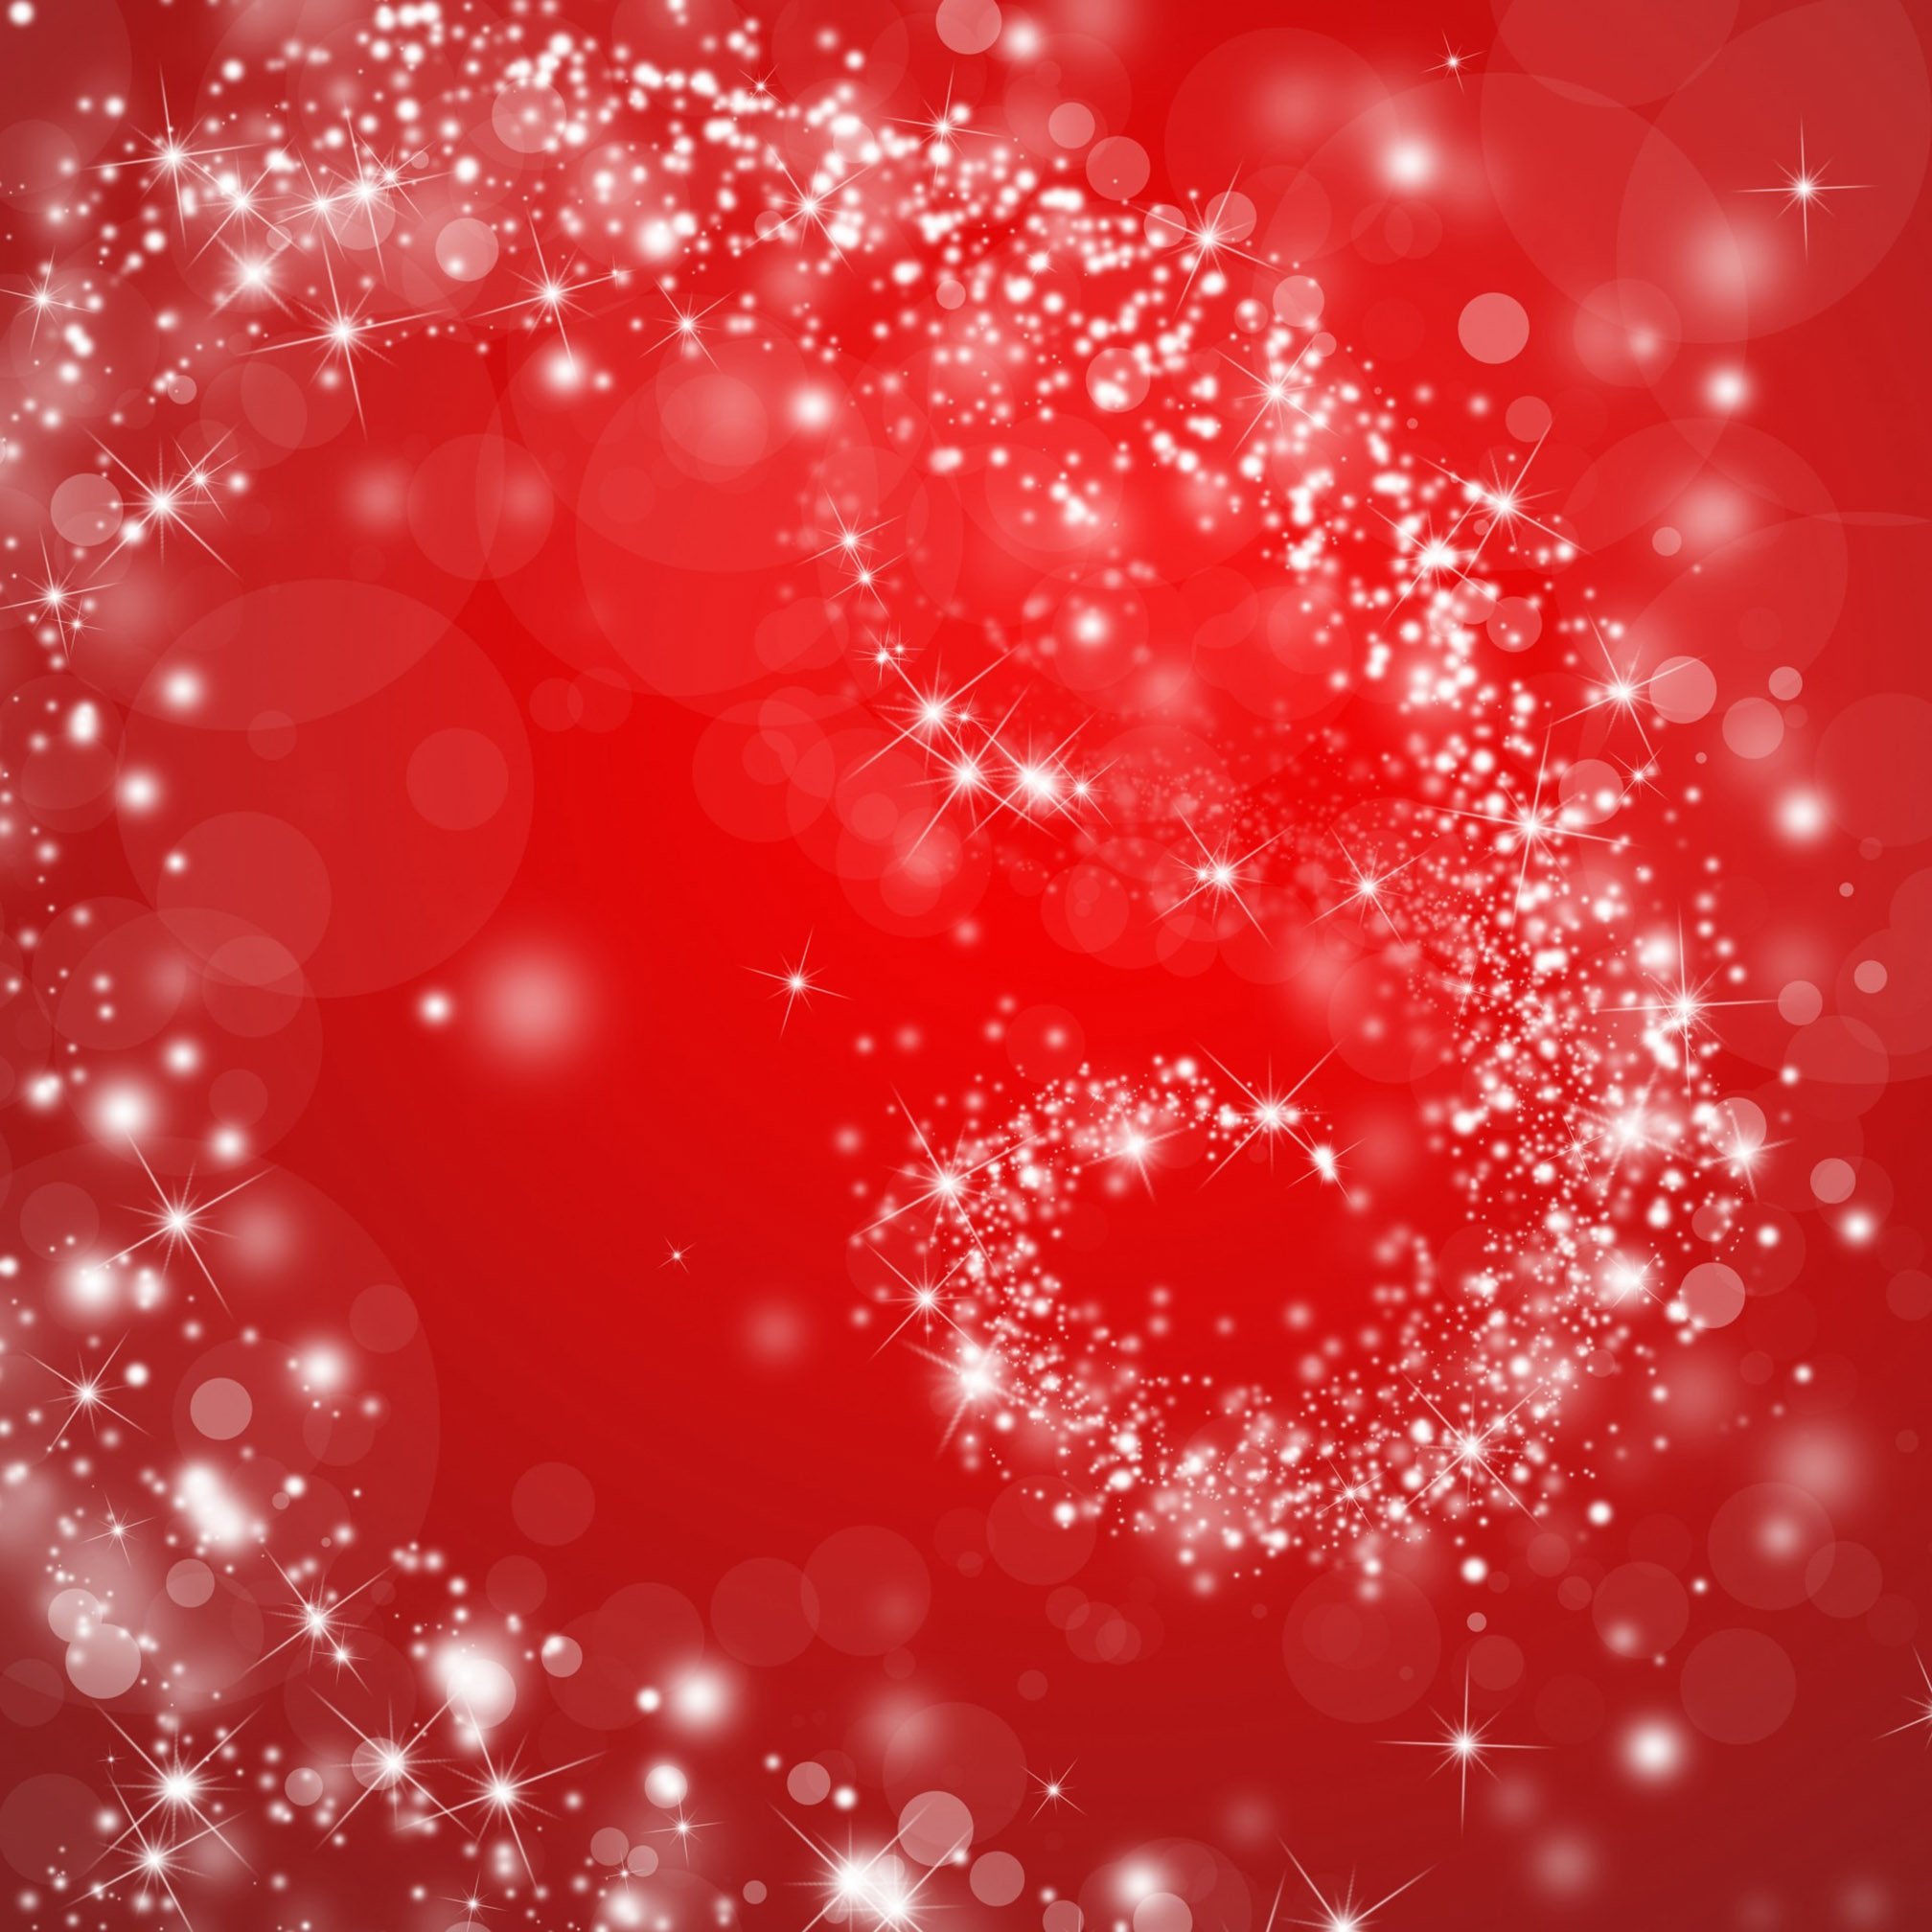 star swirl on red christmas background image | Free Textures, Photos &  Background Images